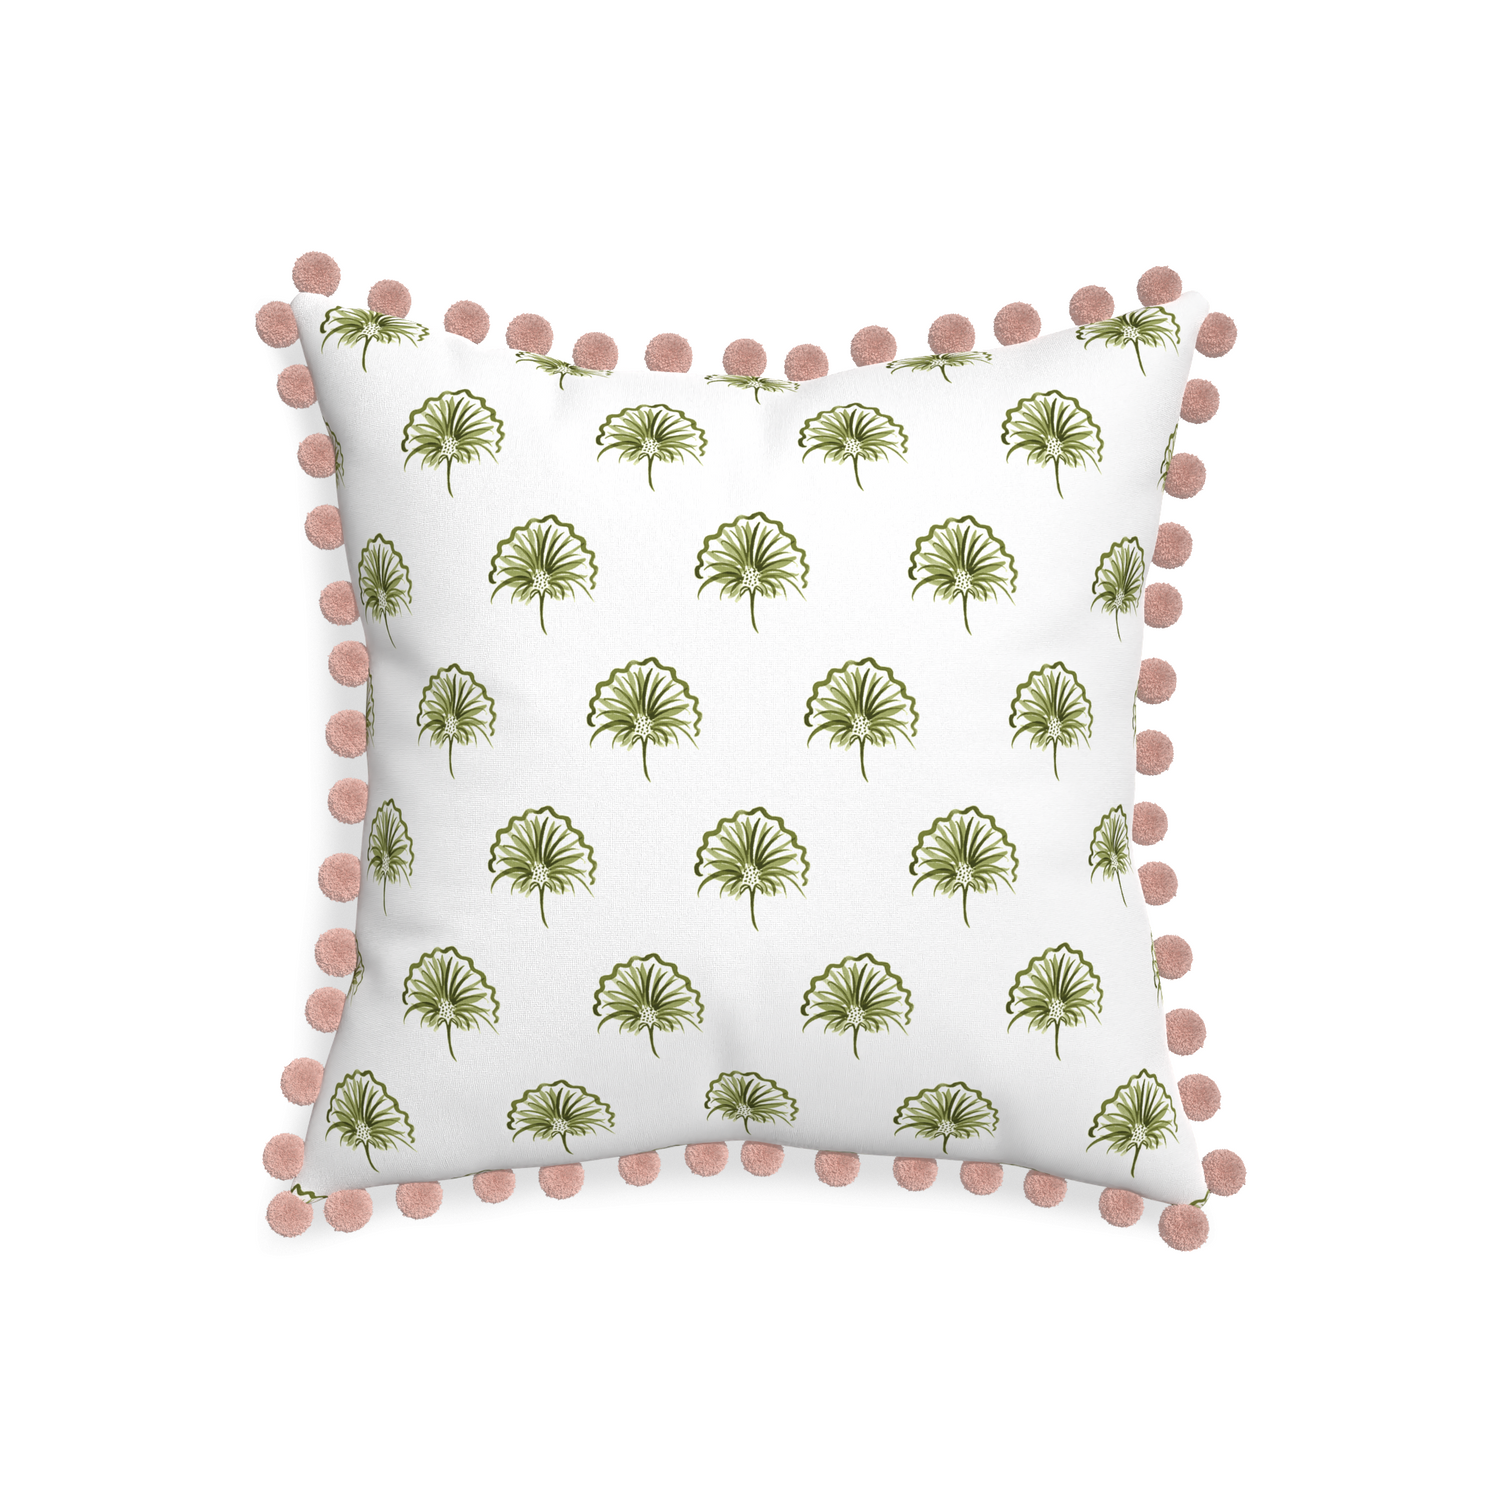 20-square penelope moss custom green floralpillow with rose pom pom on white background